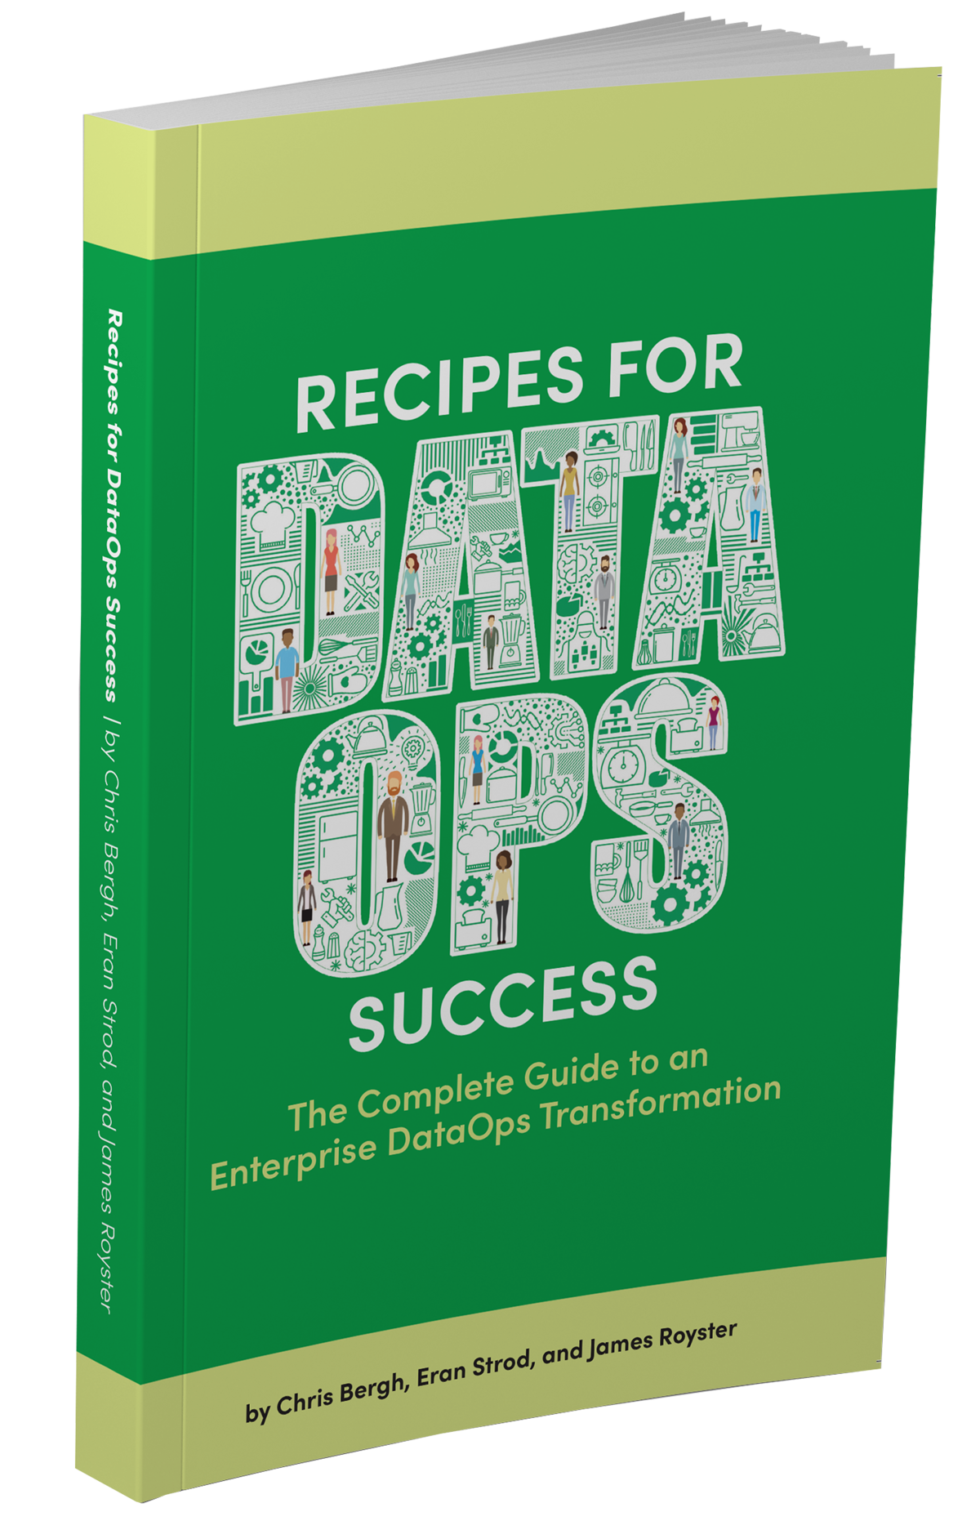 recipes-for-dataops-success-a-dataops-transformation-guide